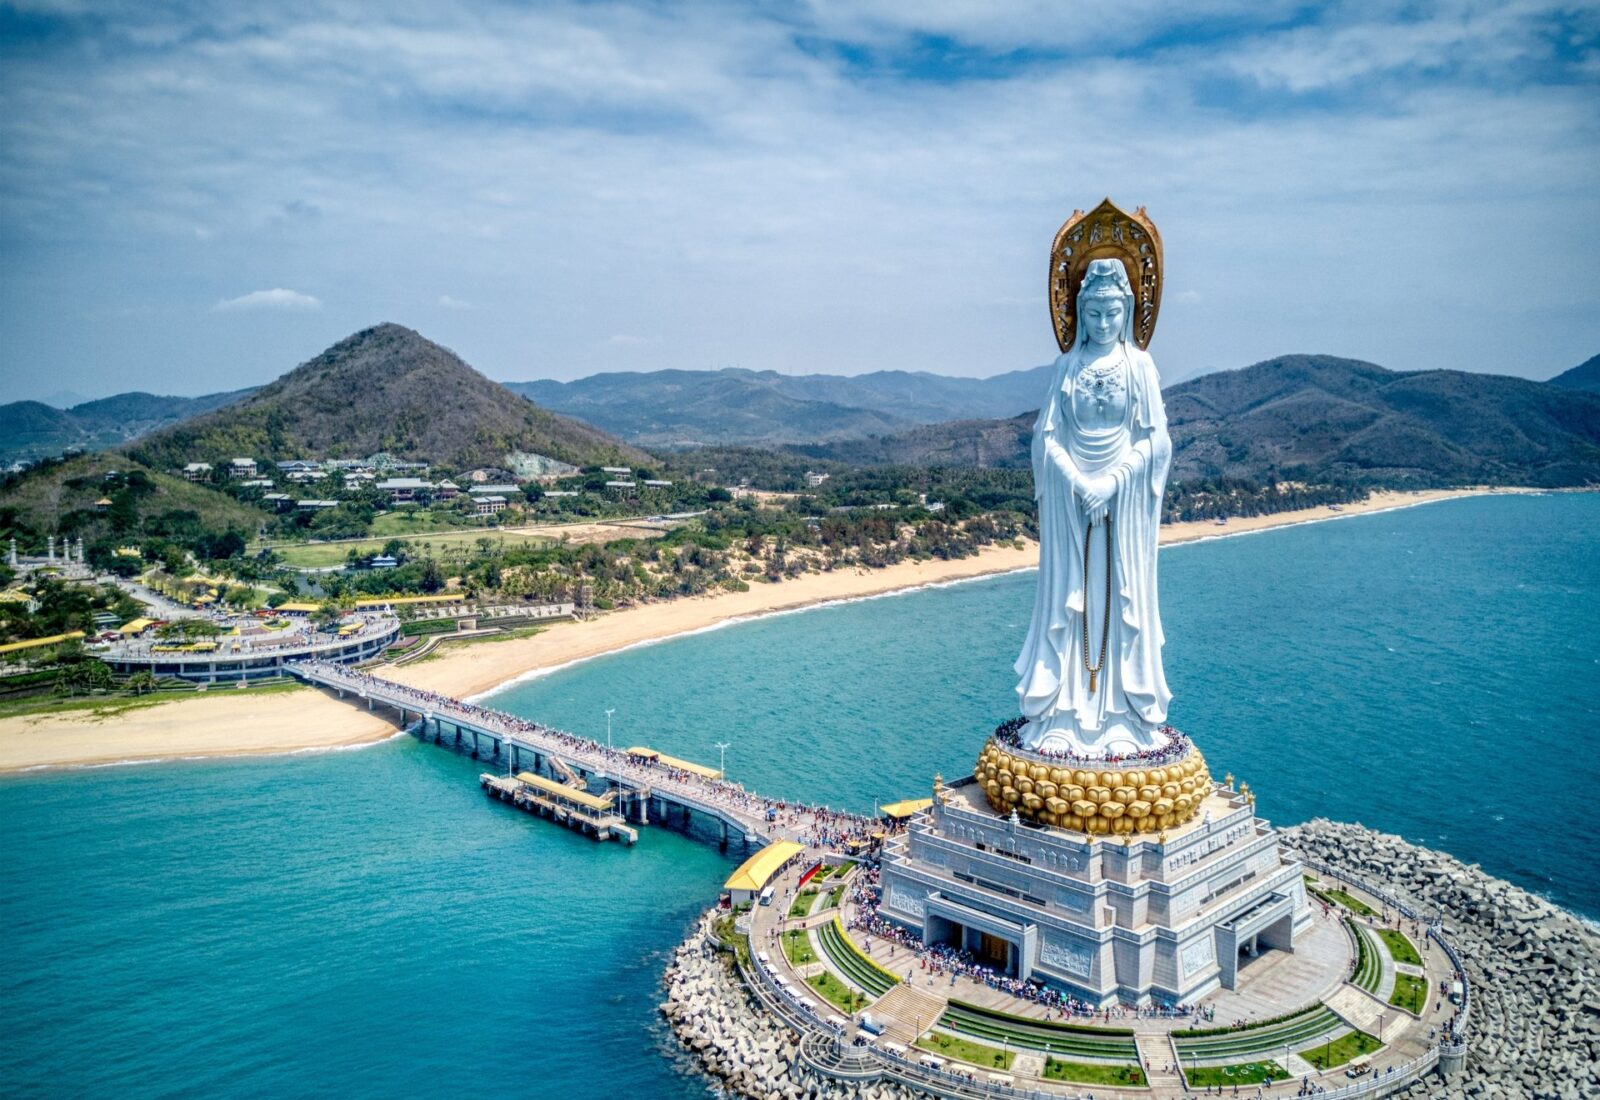 🗽 Can You Match These Famous Statues to Their Locations? The Guanyin of Nanshan, Hainan, China